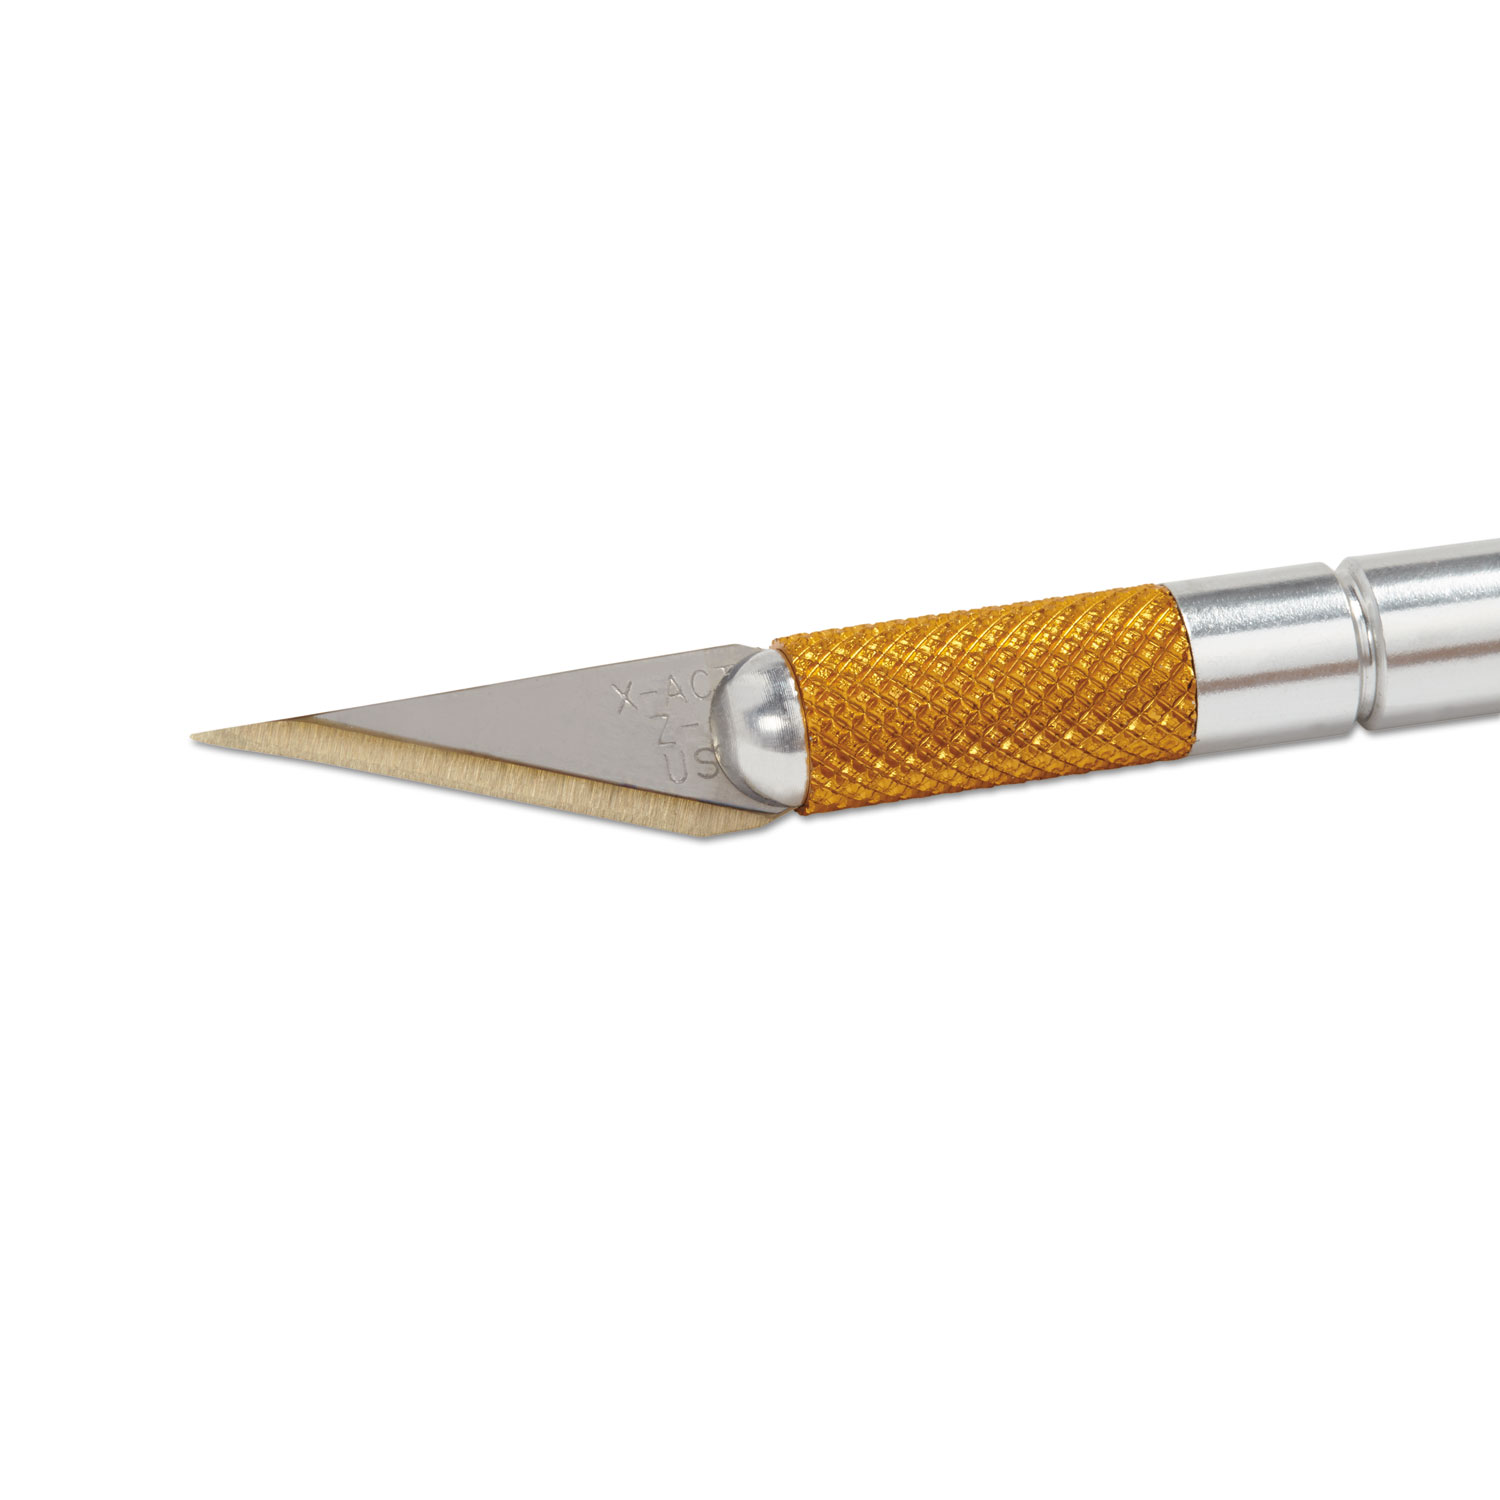 X-ACTO Z Series Light-Weight Precision Knife, No 11, 4-7/8 in L, Stainless Steel Blade, Aluminum Handle, Silver, Gold Hue - image 3 of 5